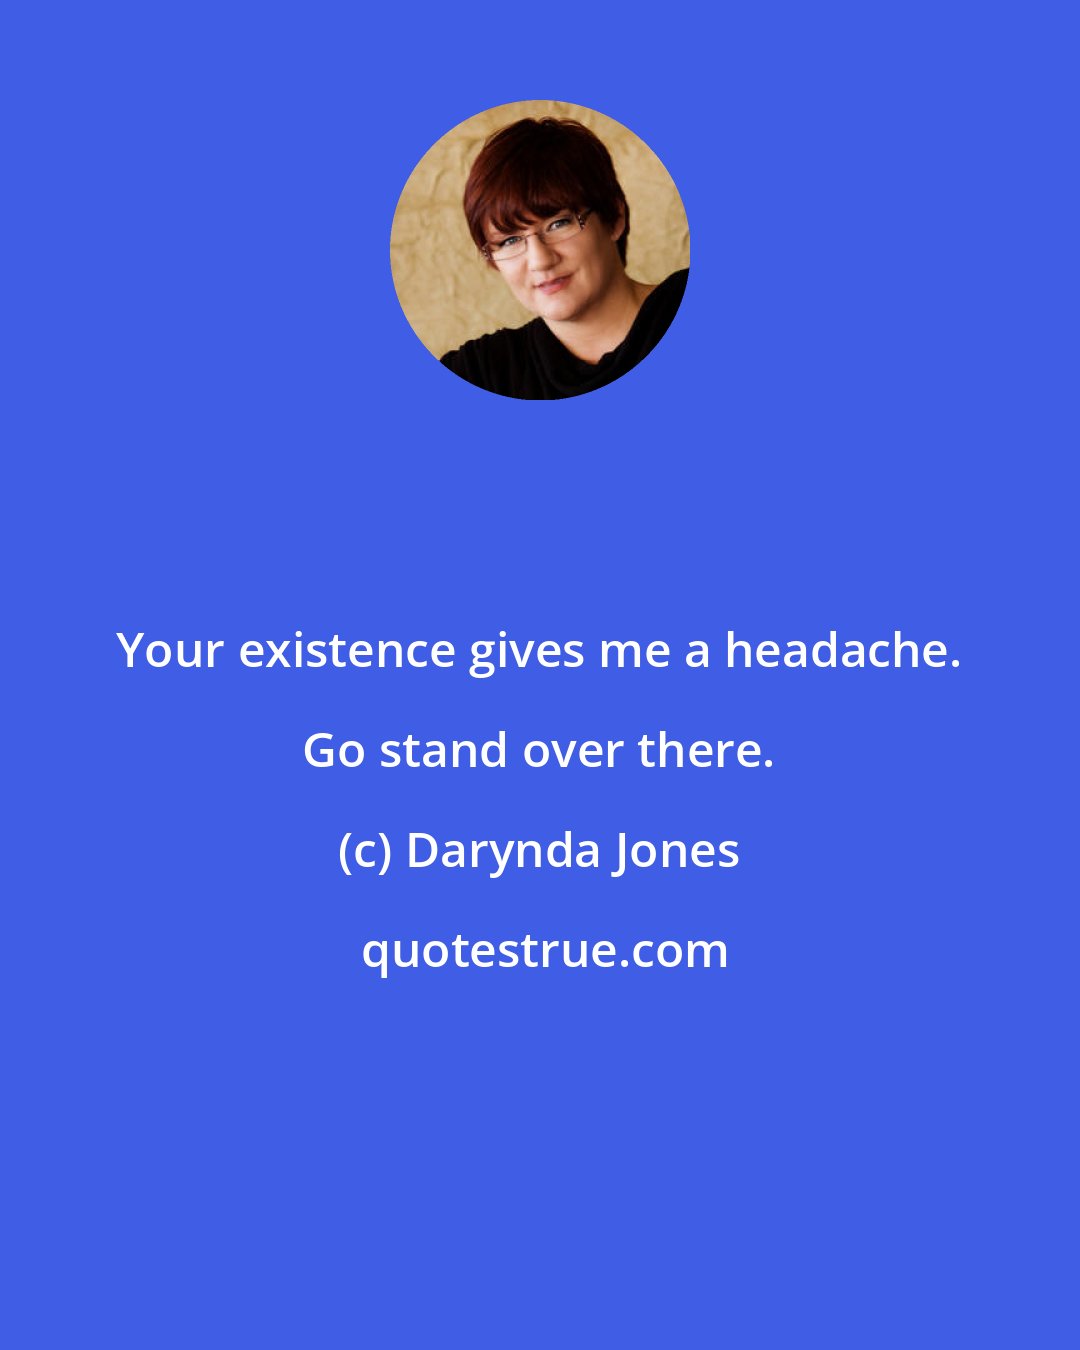 Darynda Jones: Your existence gives me a headache. Go stand over there.